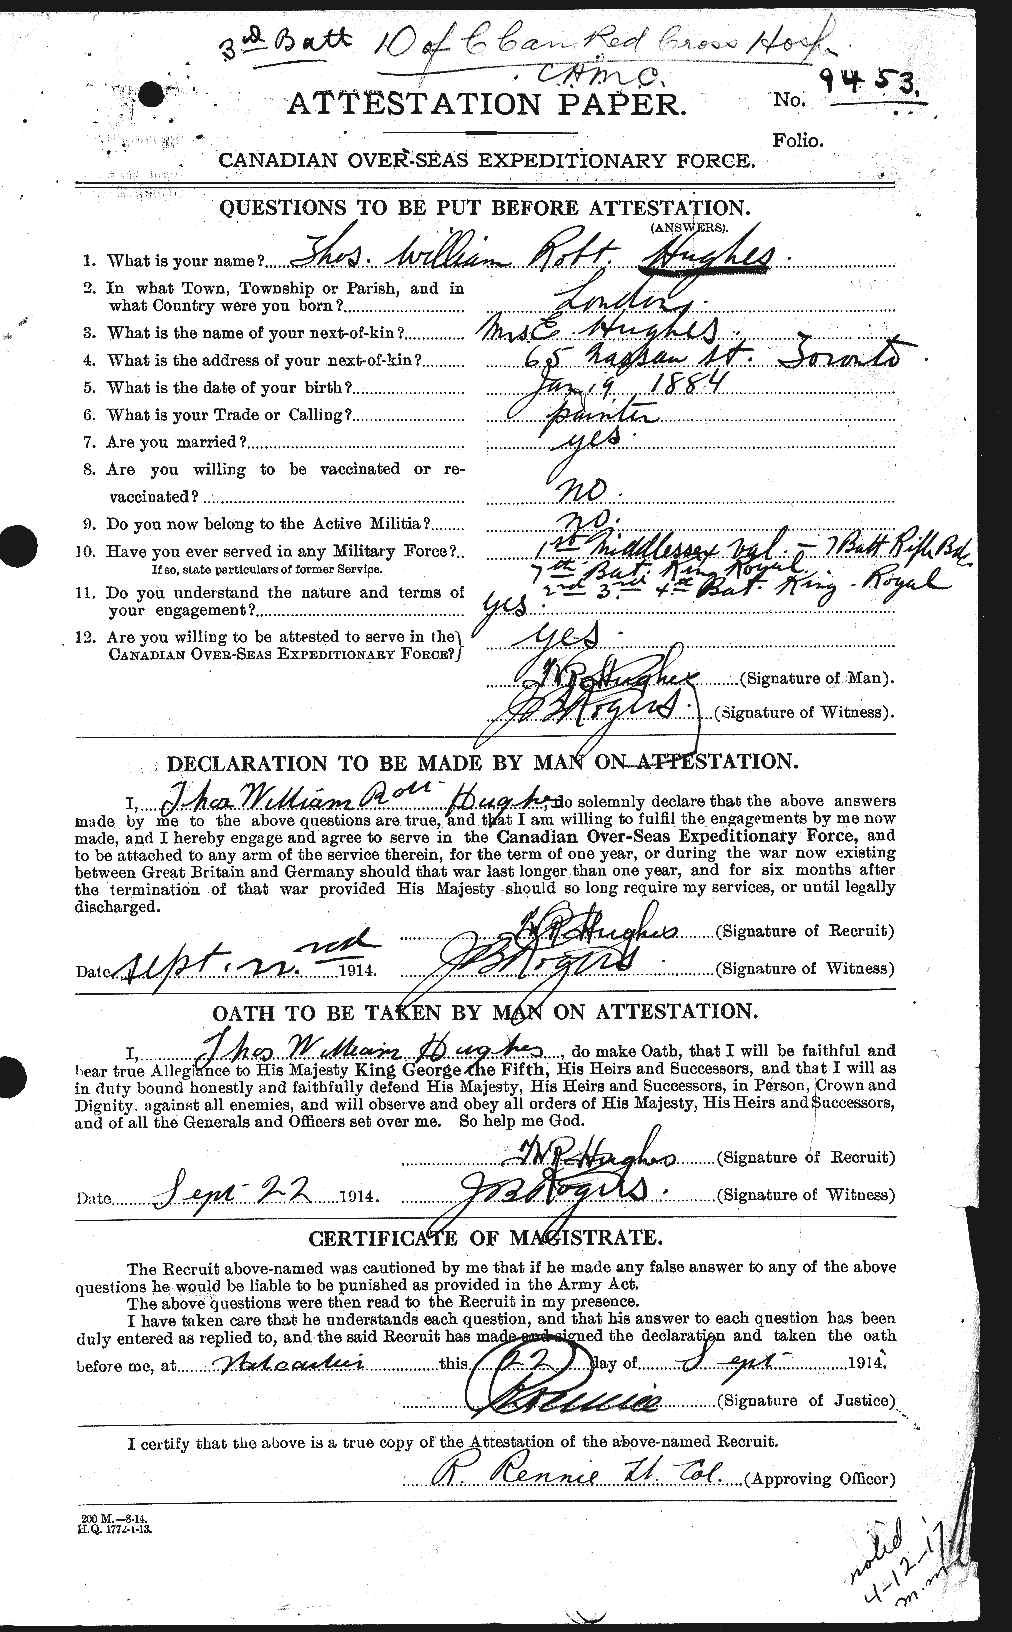 Personnel Records of the First World War - CEF 405846a